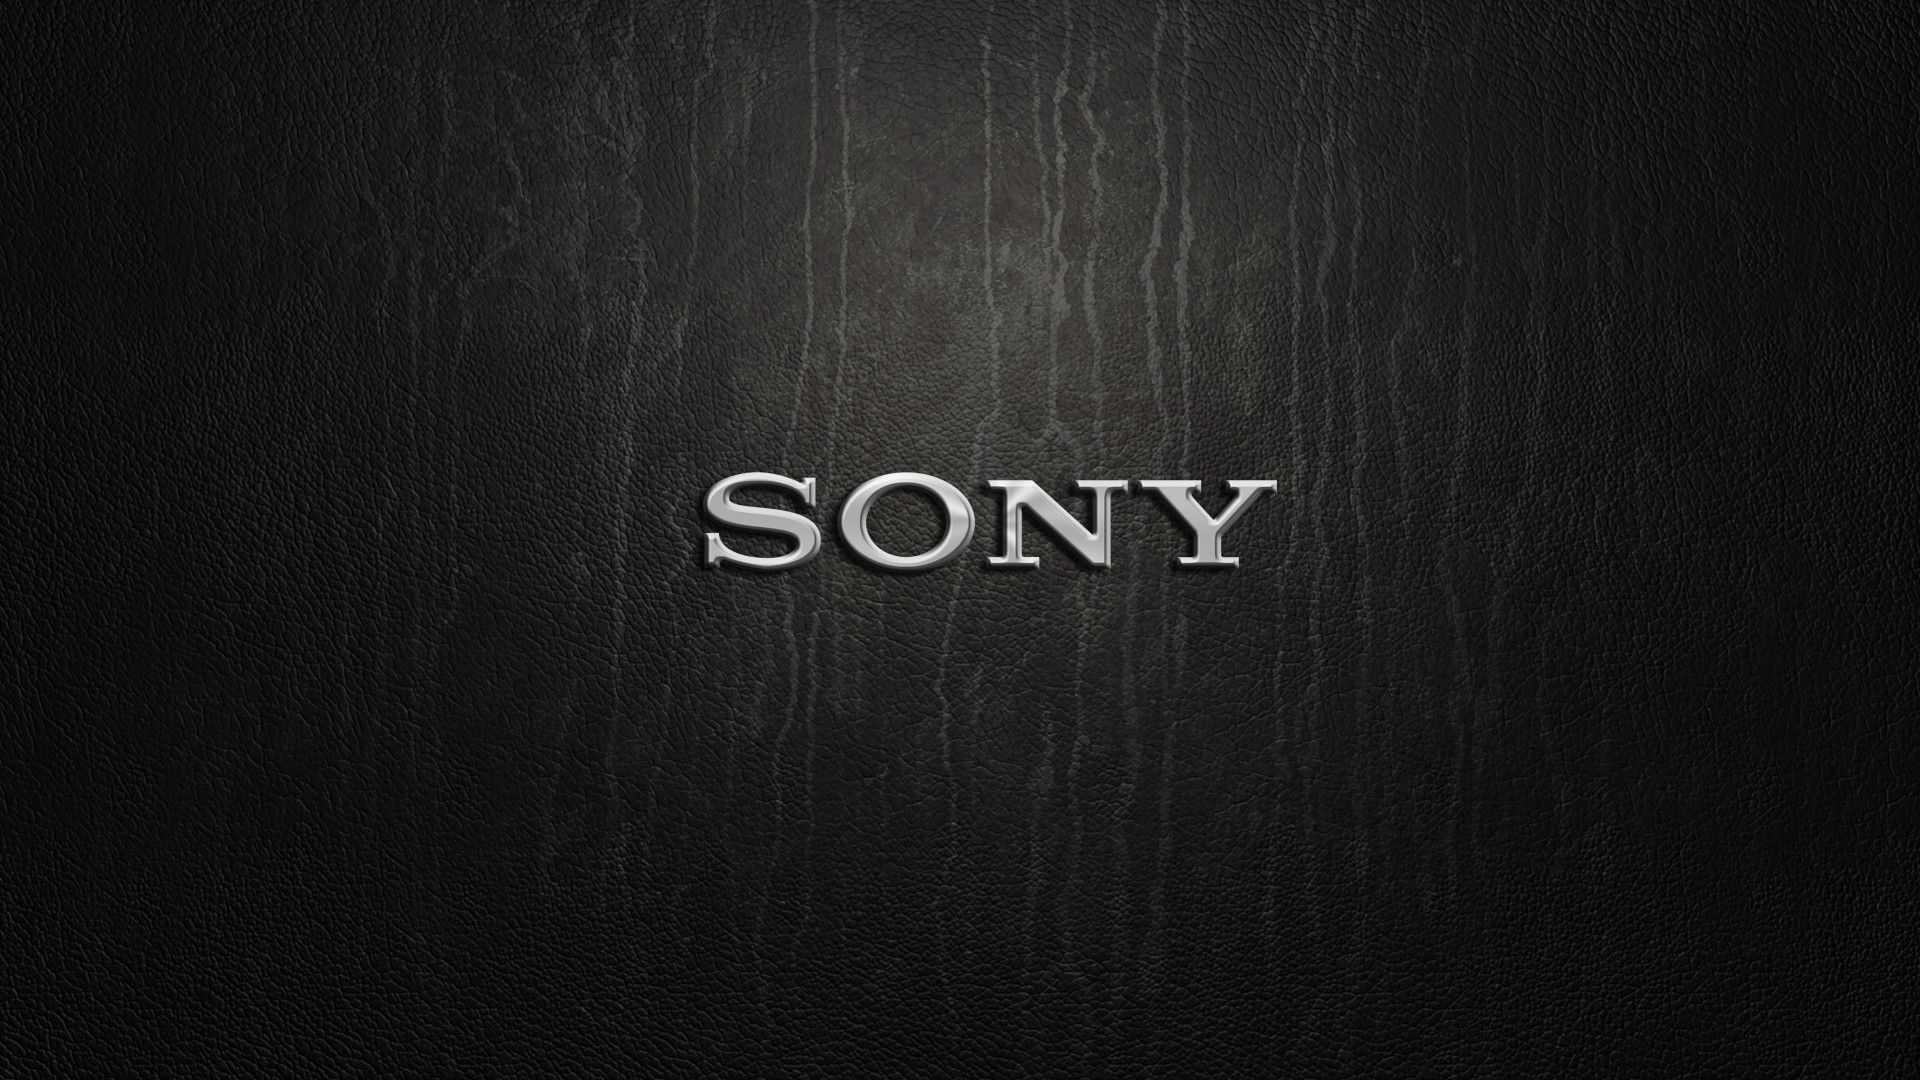 leather, Sony, brands, logos, sony computers wallpaper